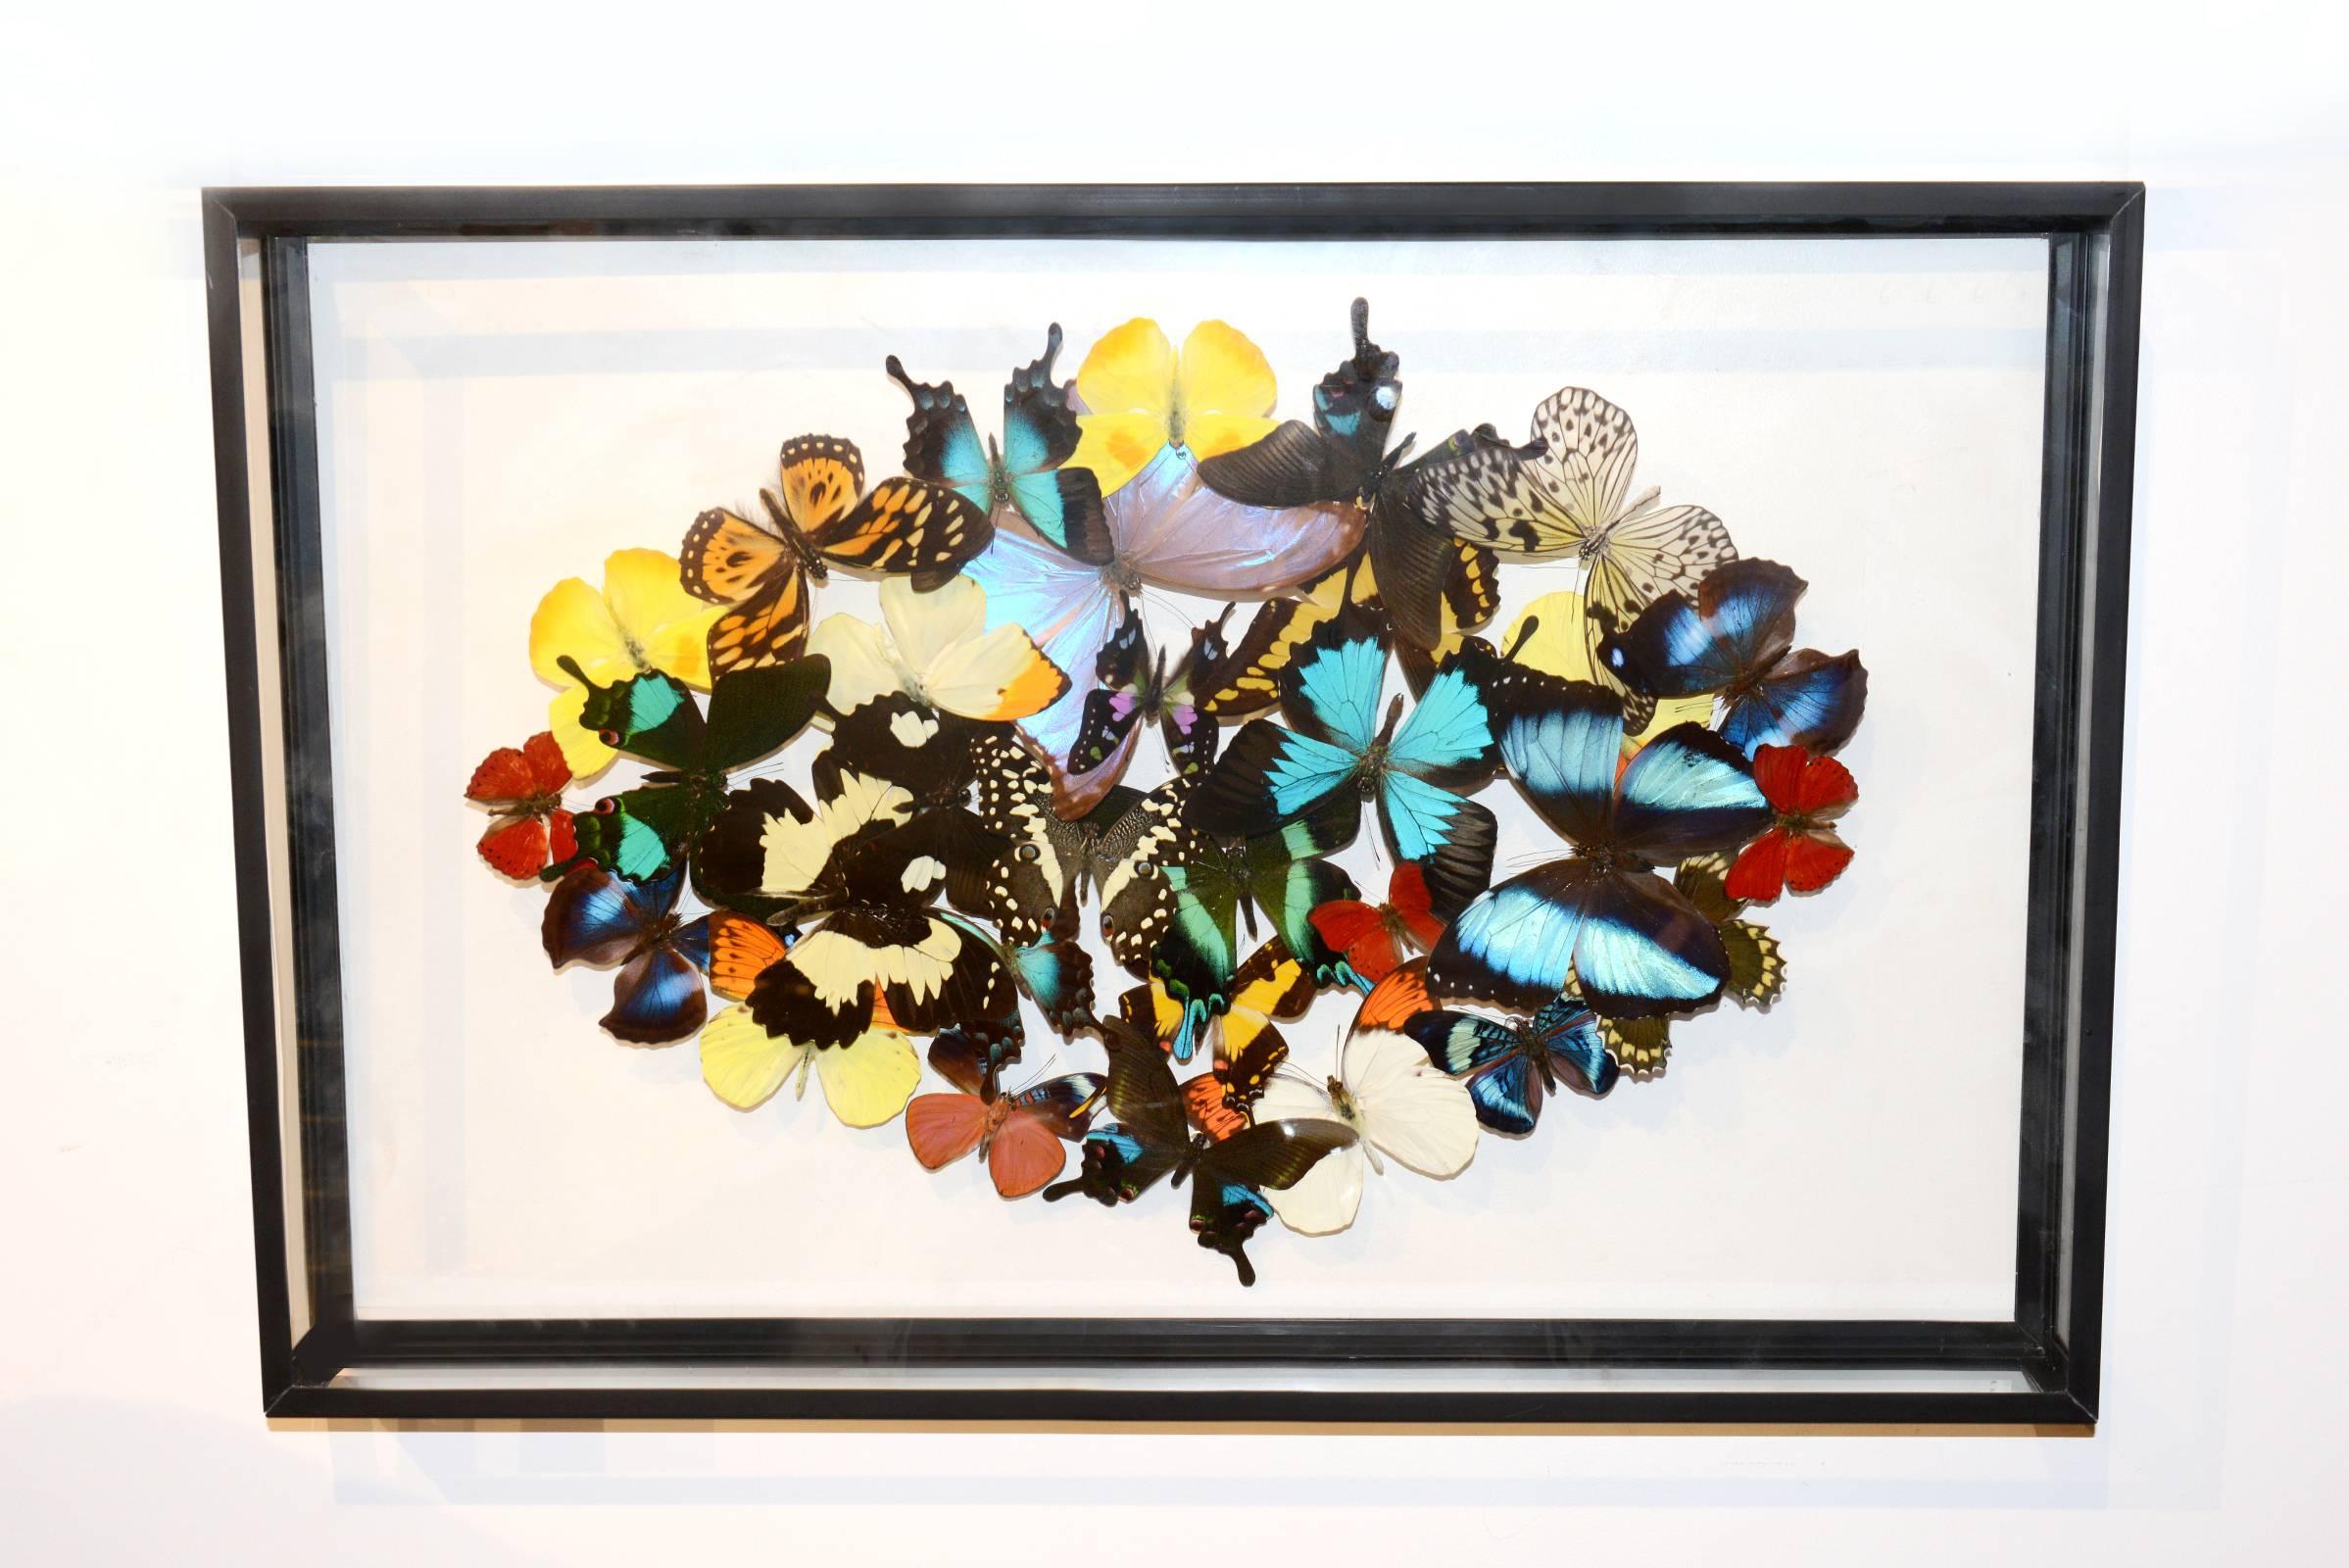 Rare butterflies multi-colors under rectangular glass frame,
wall decoration, butterflies from breeding farms. Exceptional
and unique piece made in France in 2016 by Olivier Violo.
   